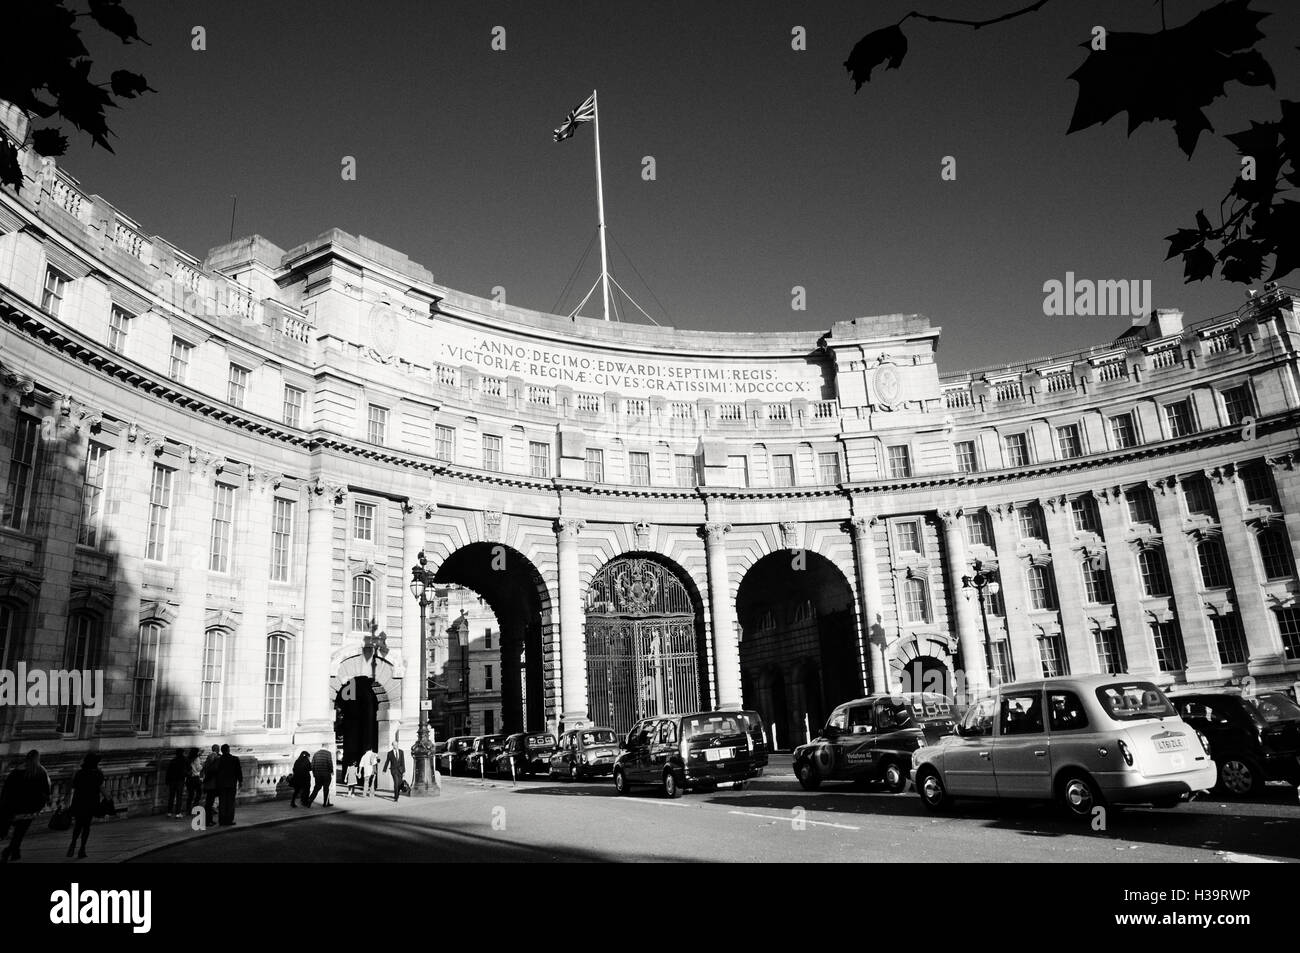 Admiralty Arch, The Mall, London, England, UK Stock Photo